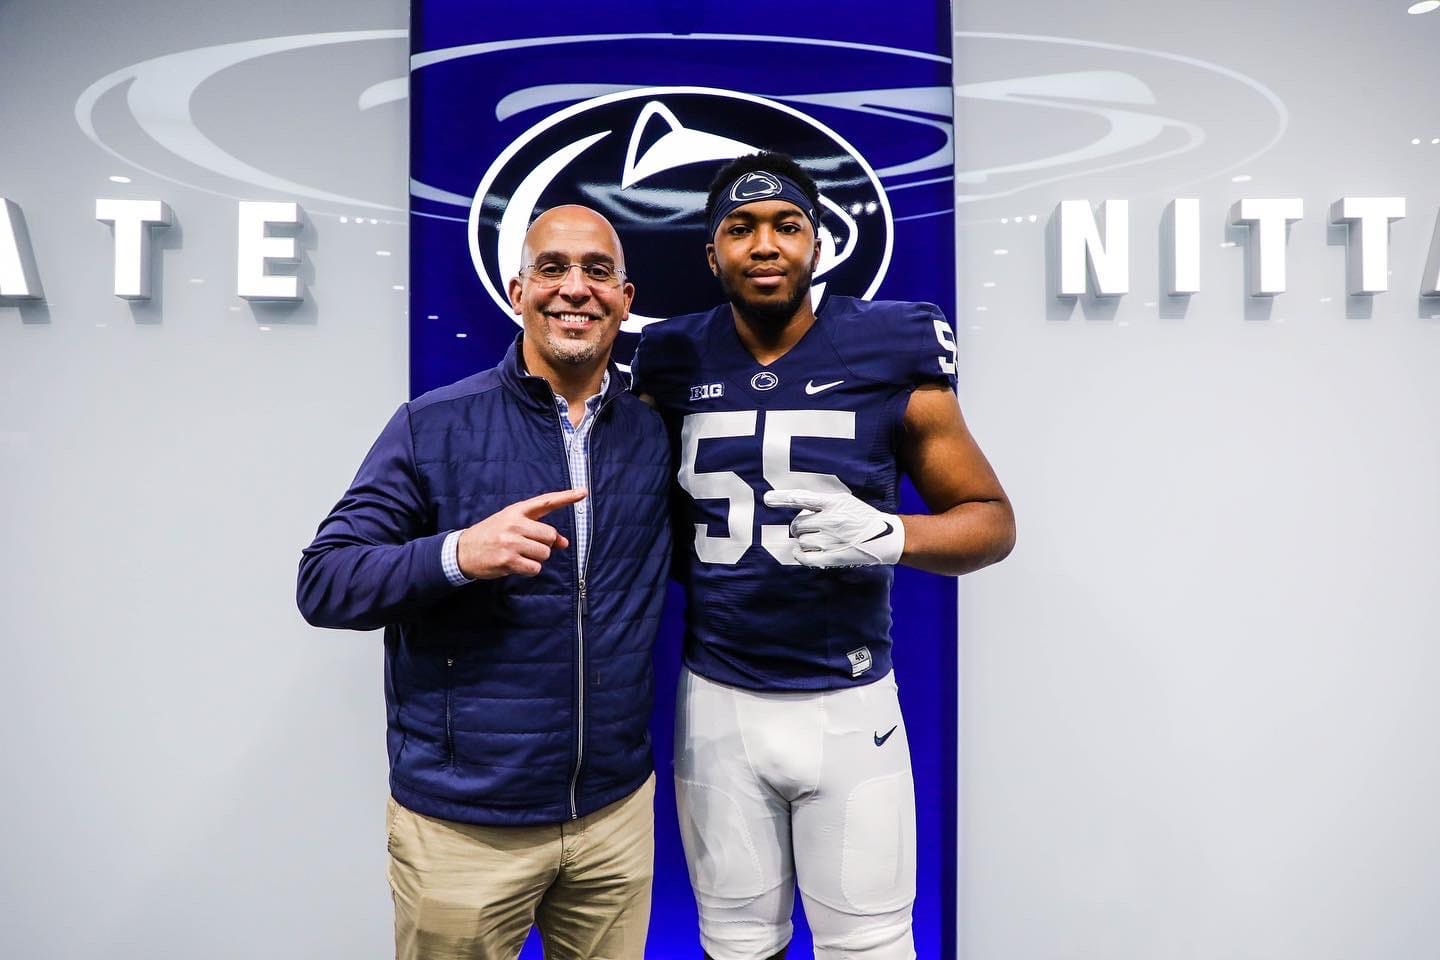 Chimdy Onoh, Penn State Recruiting